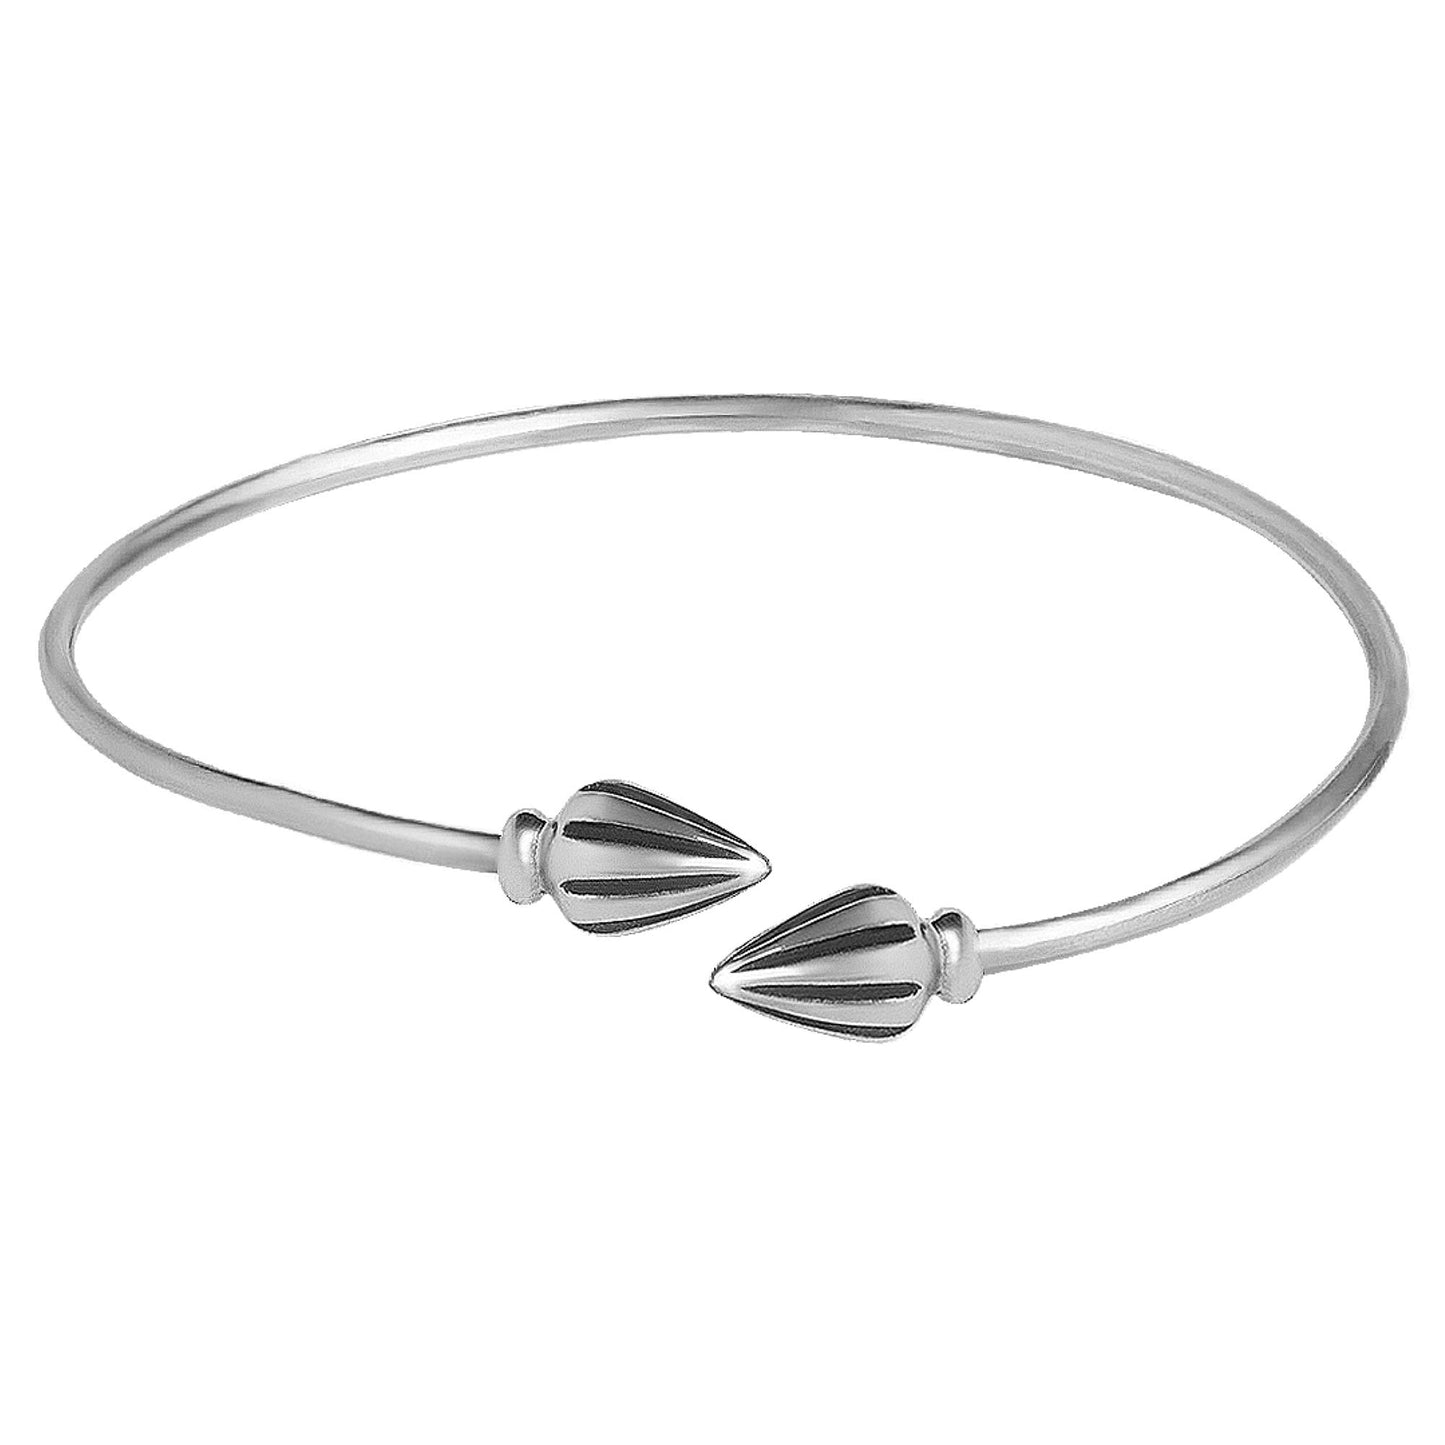 GIVA AVNI 925 Oxidised Silver Flower Bud Bangle Bracelet Gifts for Girlfriend, Gifts for Women & Girls| With Certificate of Authenticity and 925 Stamp | 6 Month Warranty*